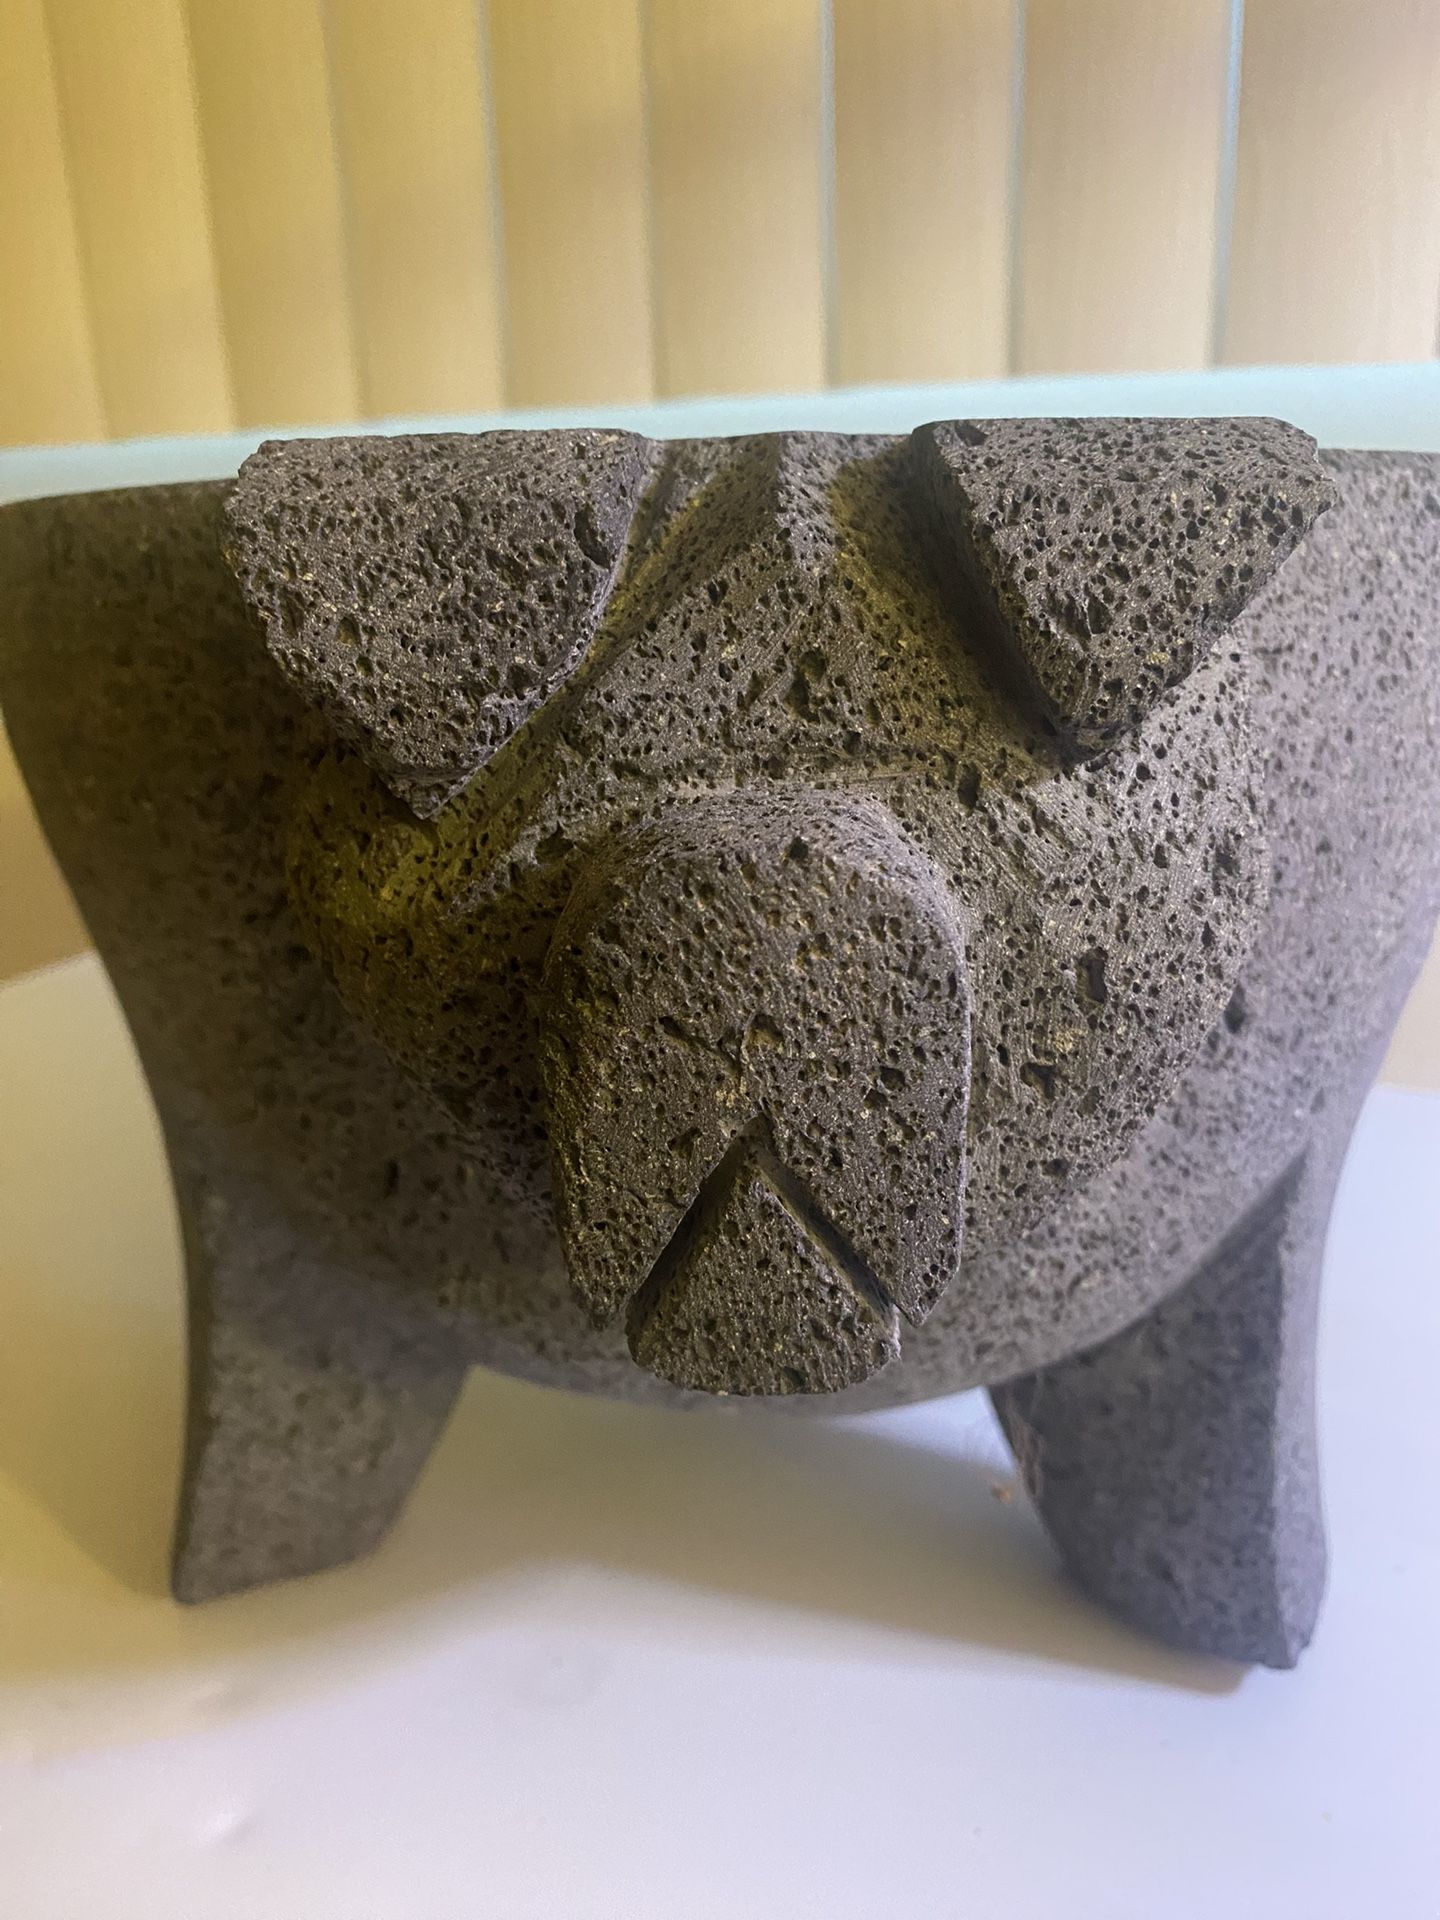 Molcajete Pitzotl 1 Gallon 4 Liters, 12 inches in Diameter made of Volcanic Stone